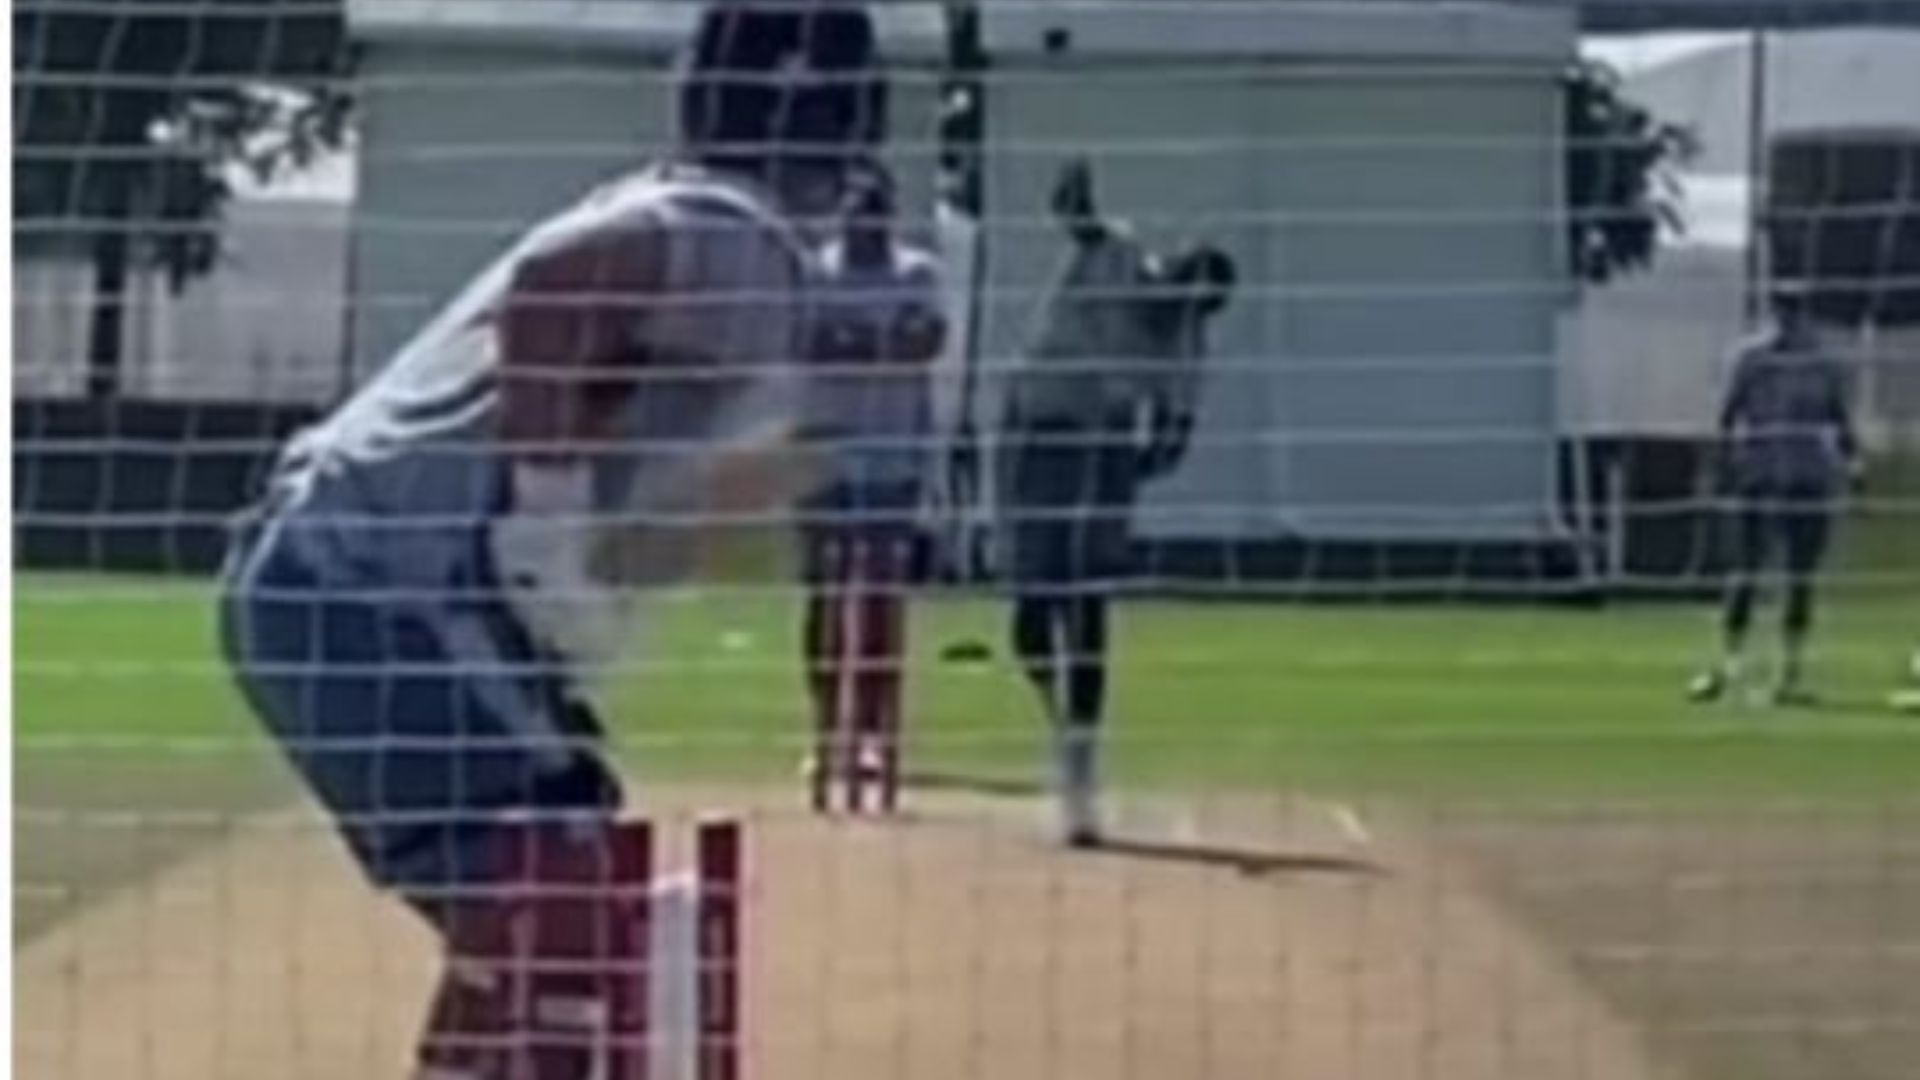 Jofra Archer bowling at the nets (Image Courtesy: Barmy Army Twitter handle)